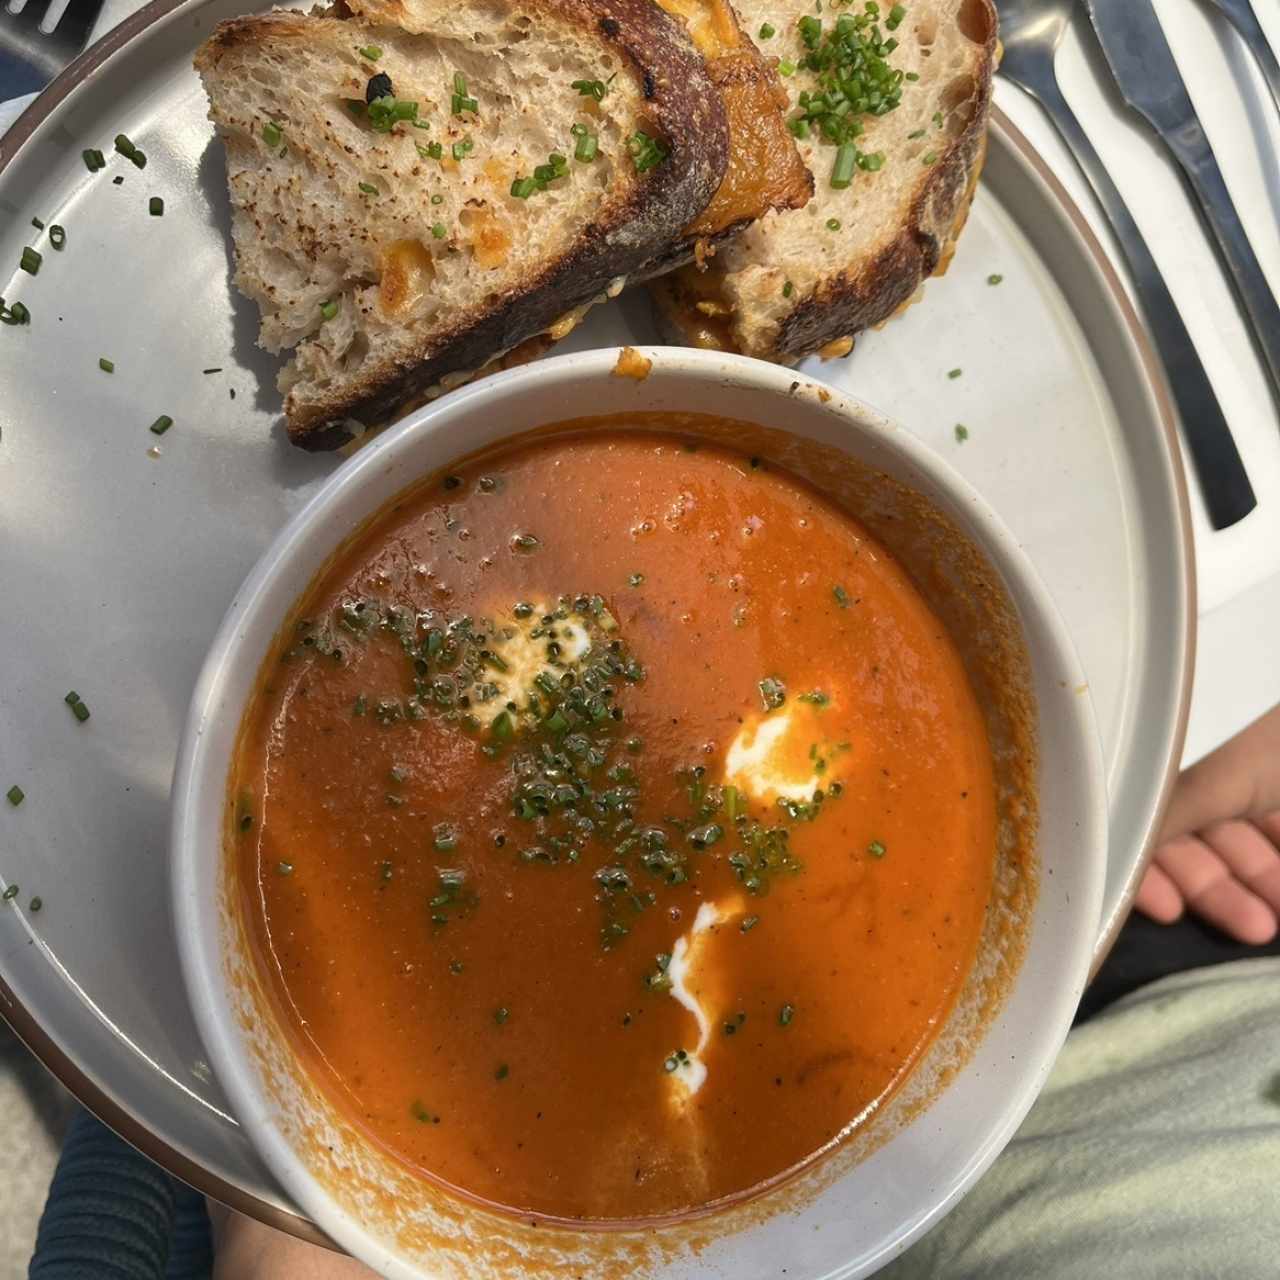 Tomato soup and cheese grilled sandwich